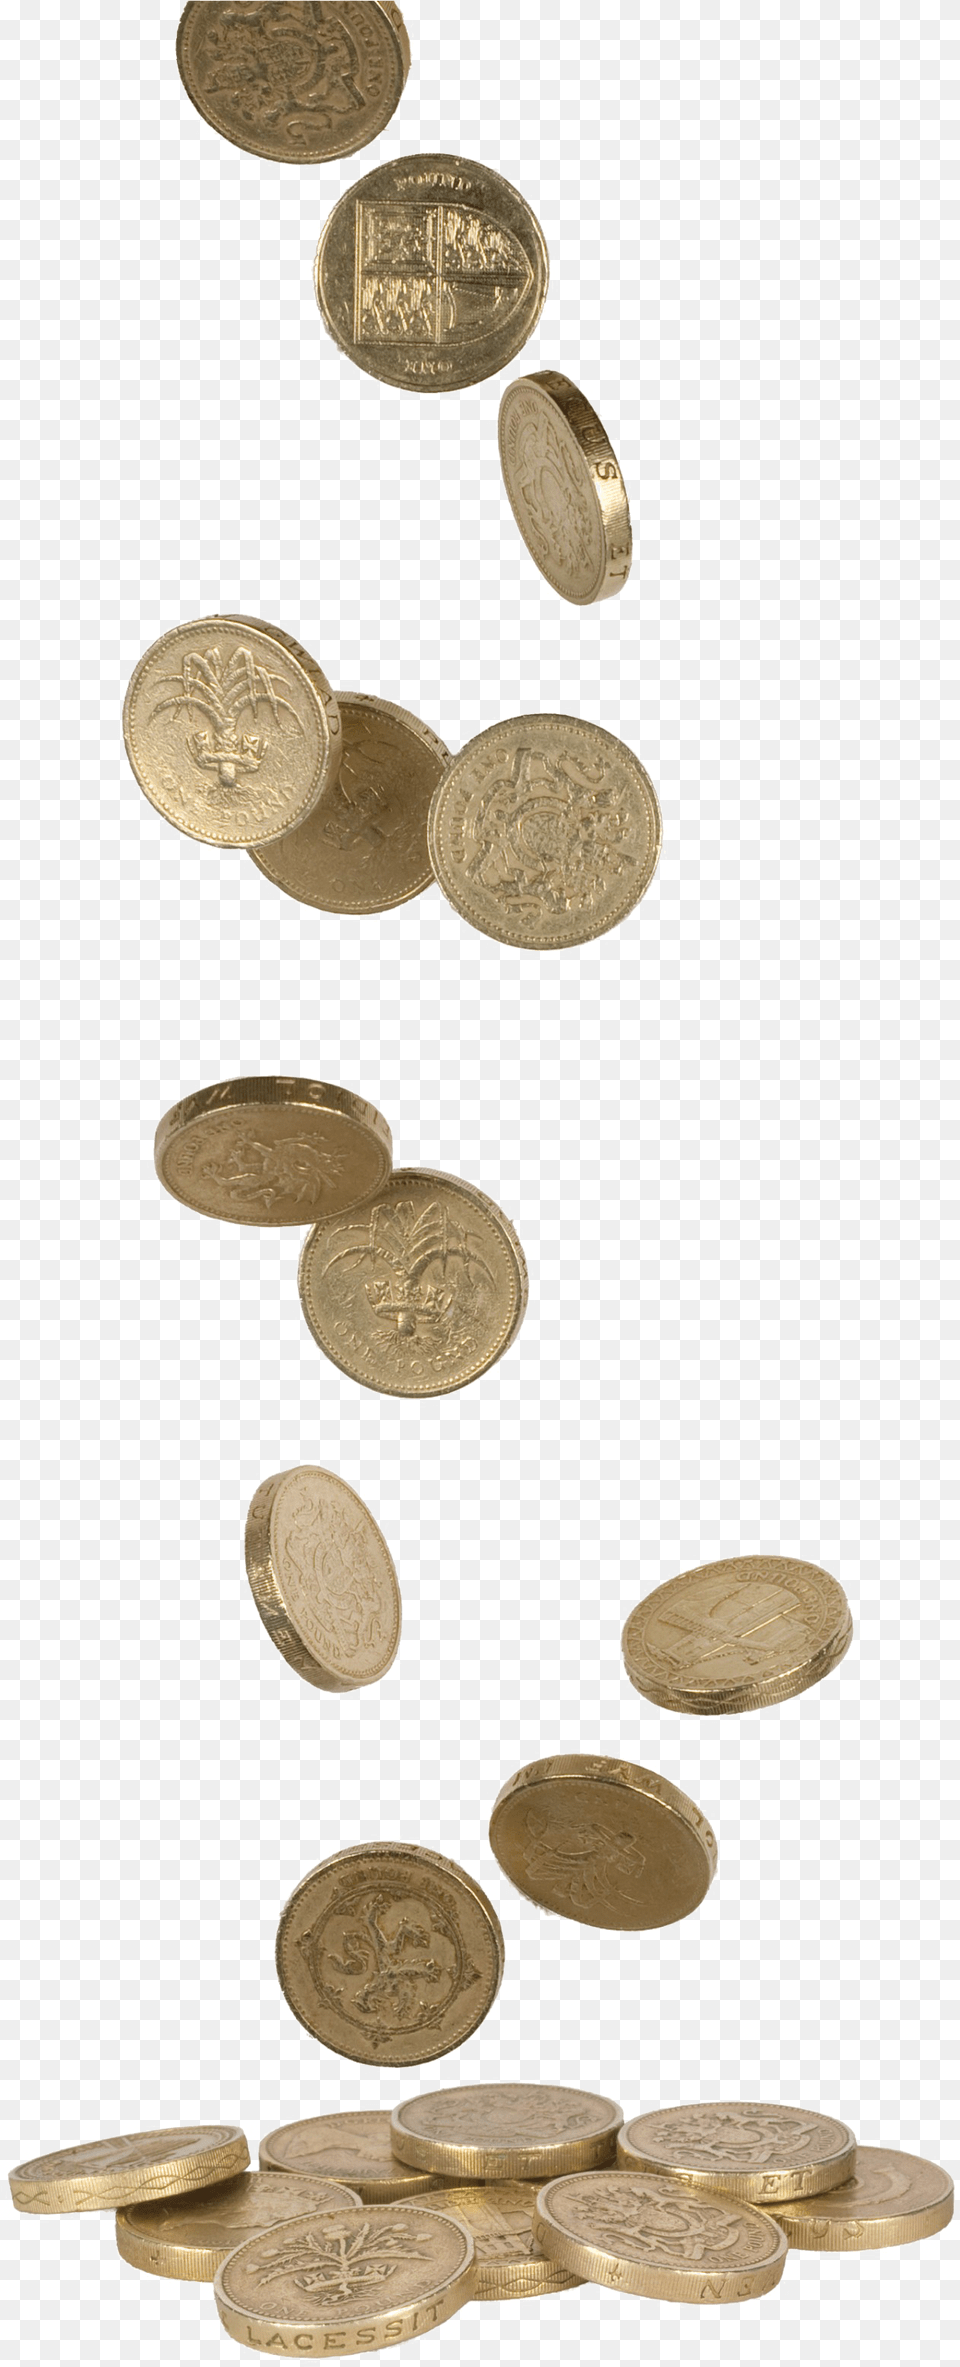 Falling Coins Download Falling Coins, Treasure, Coin, Money, Accessories Png Image